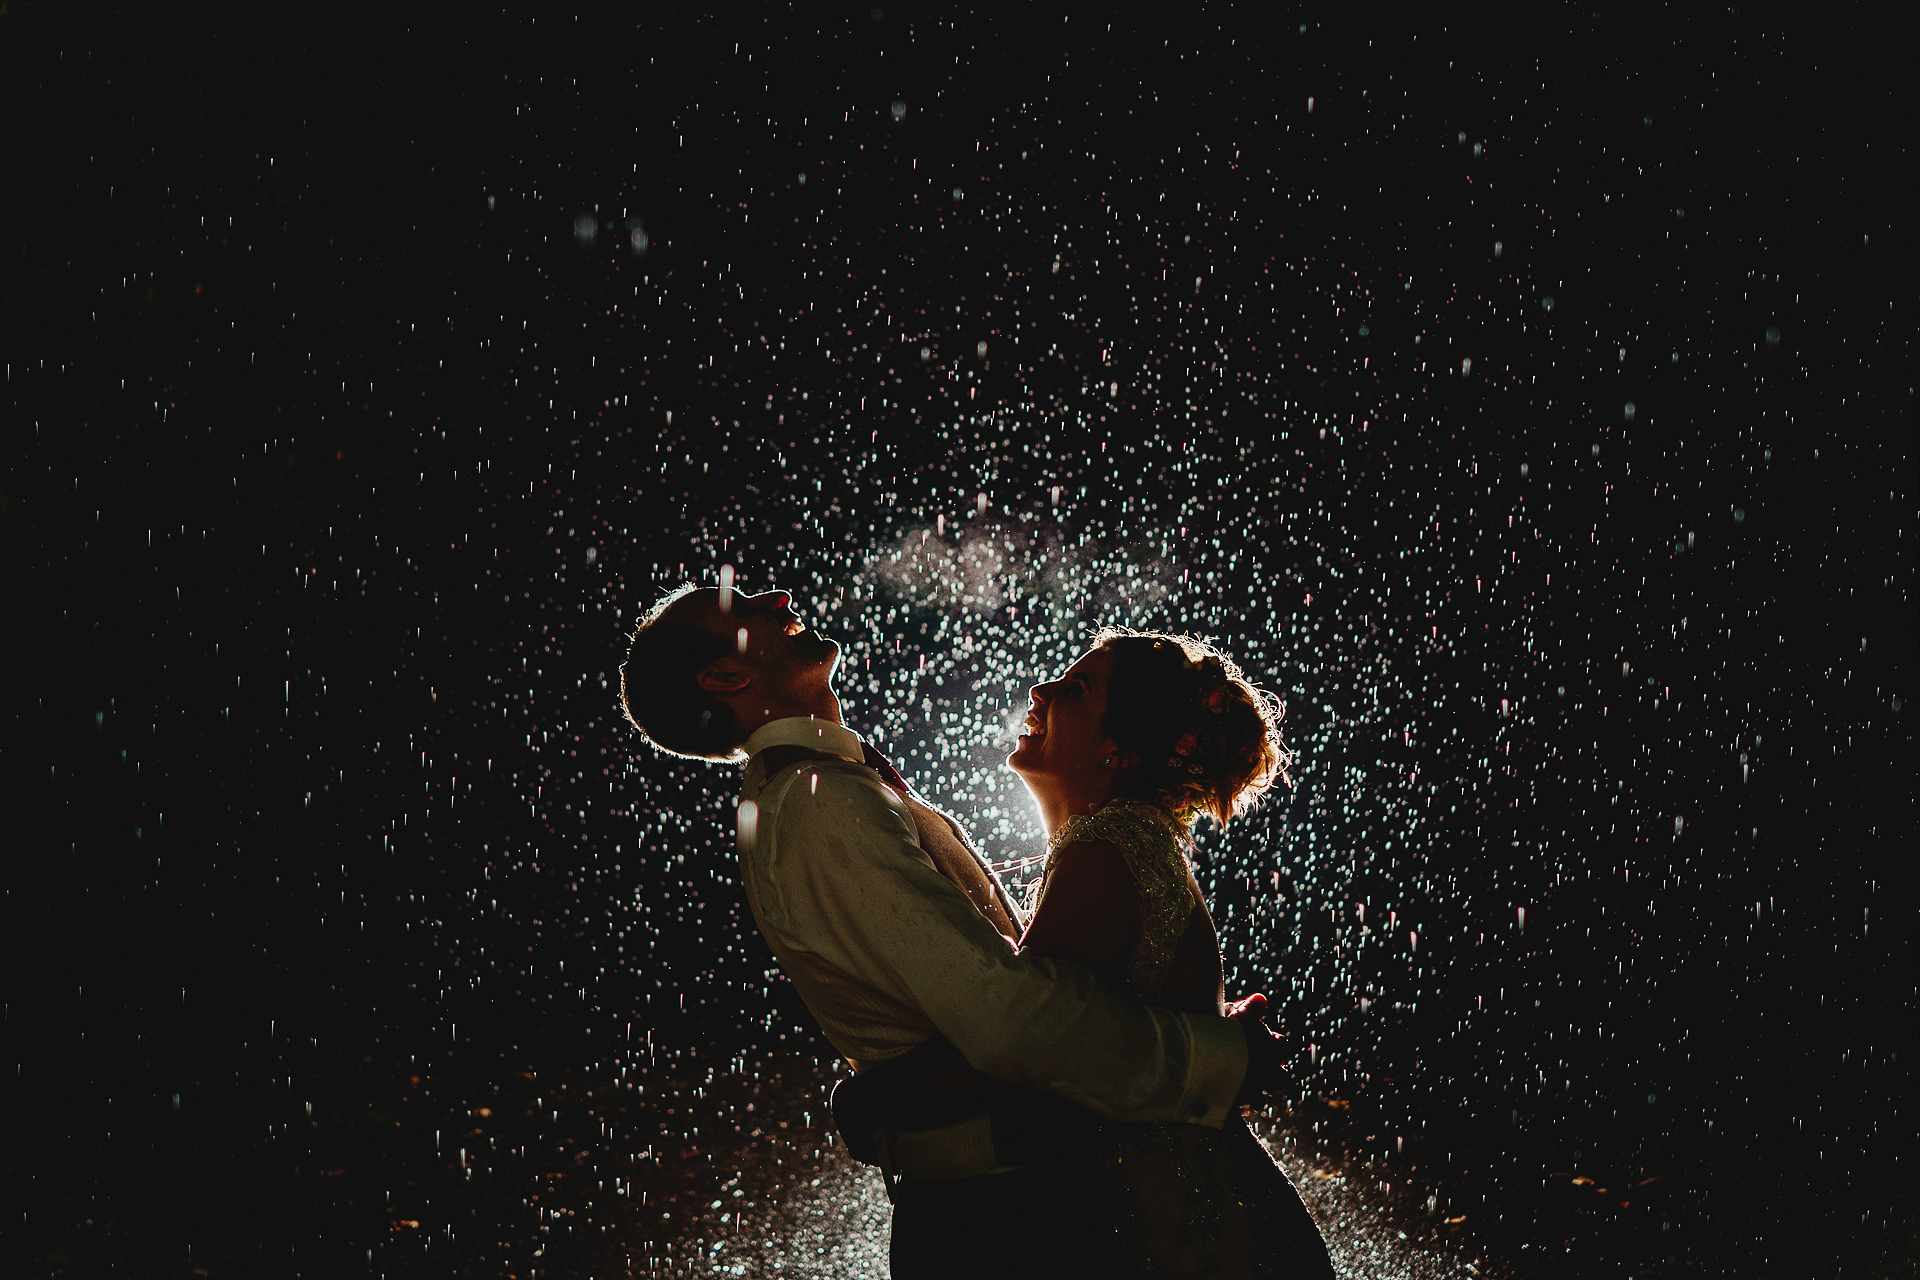 Bride and groom laughing in the rain together at night